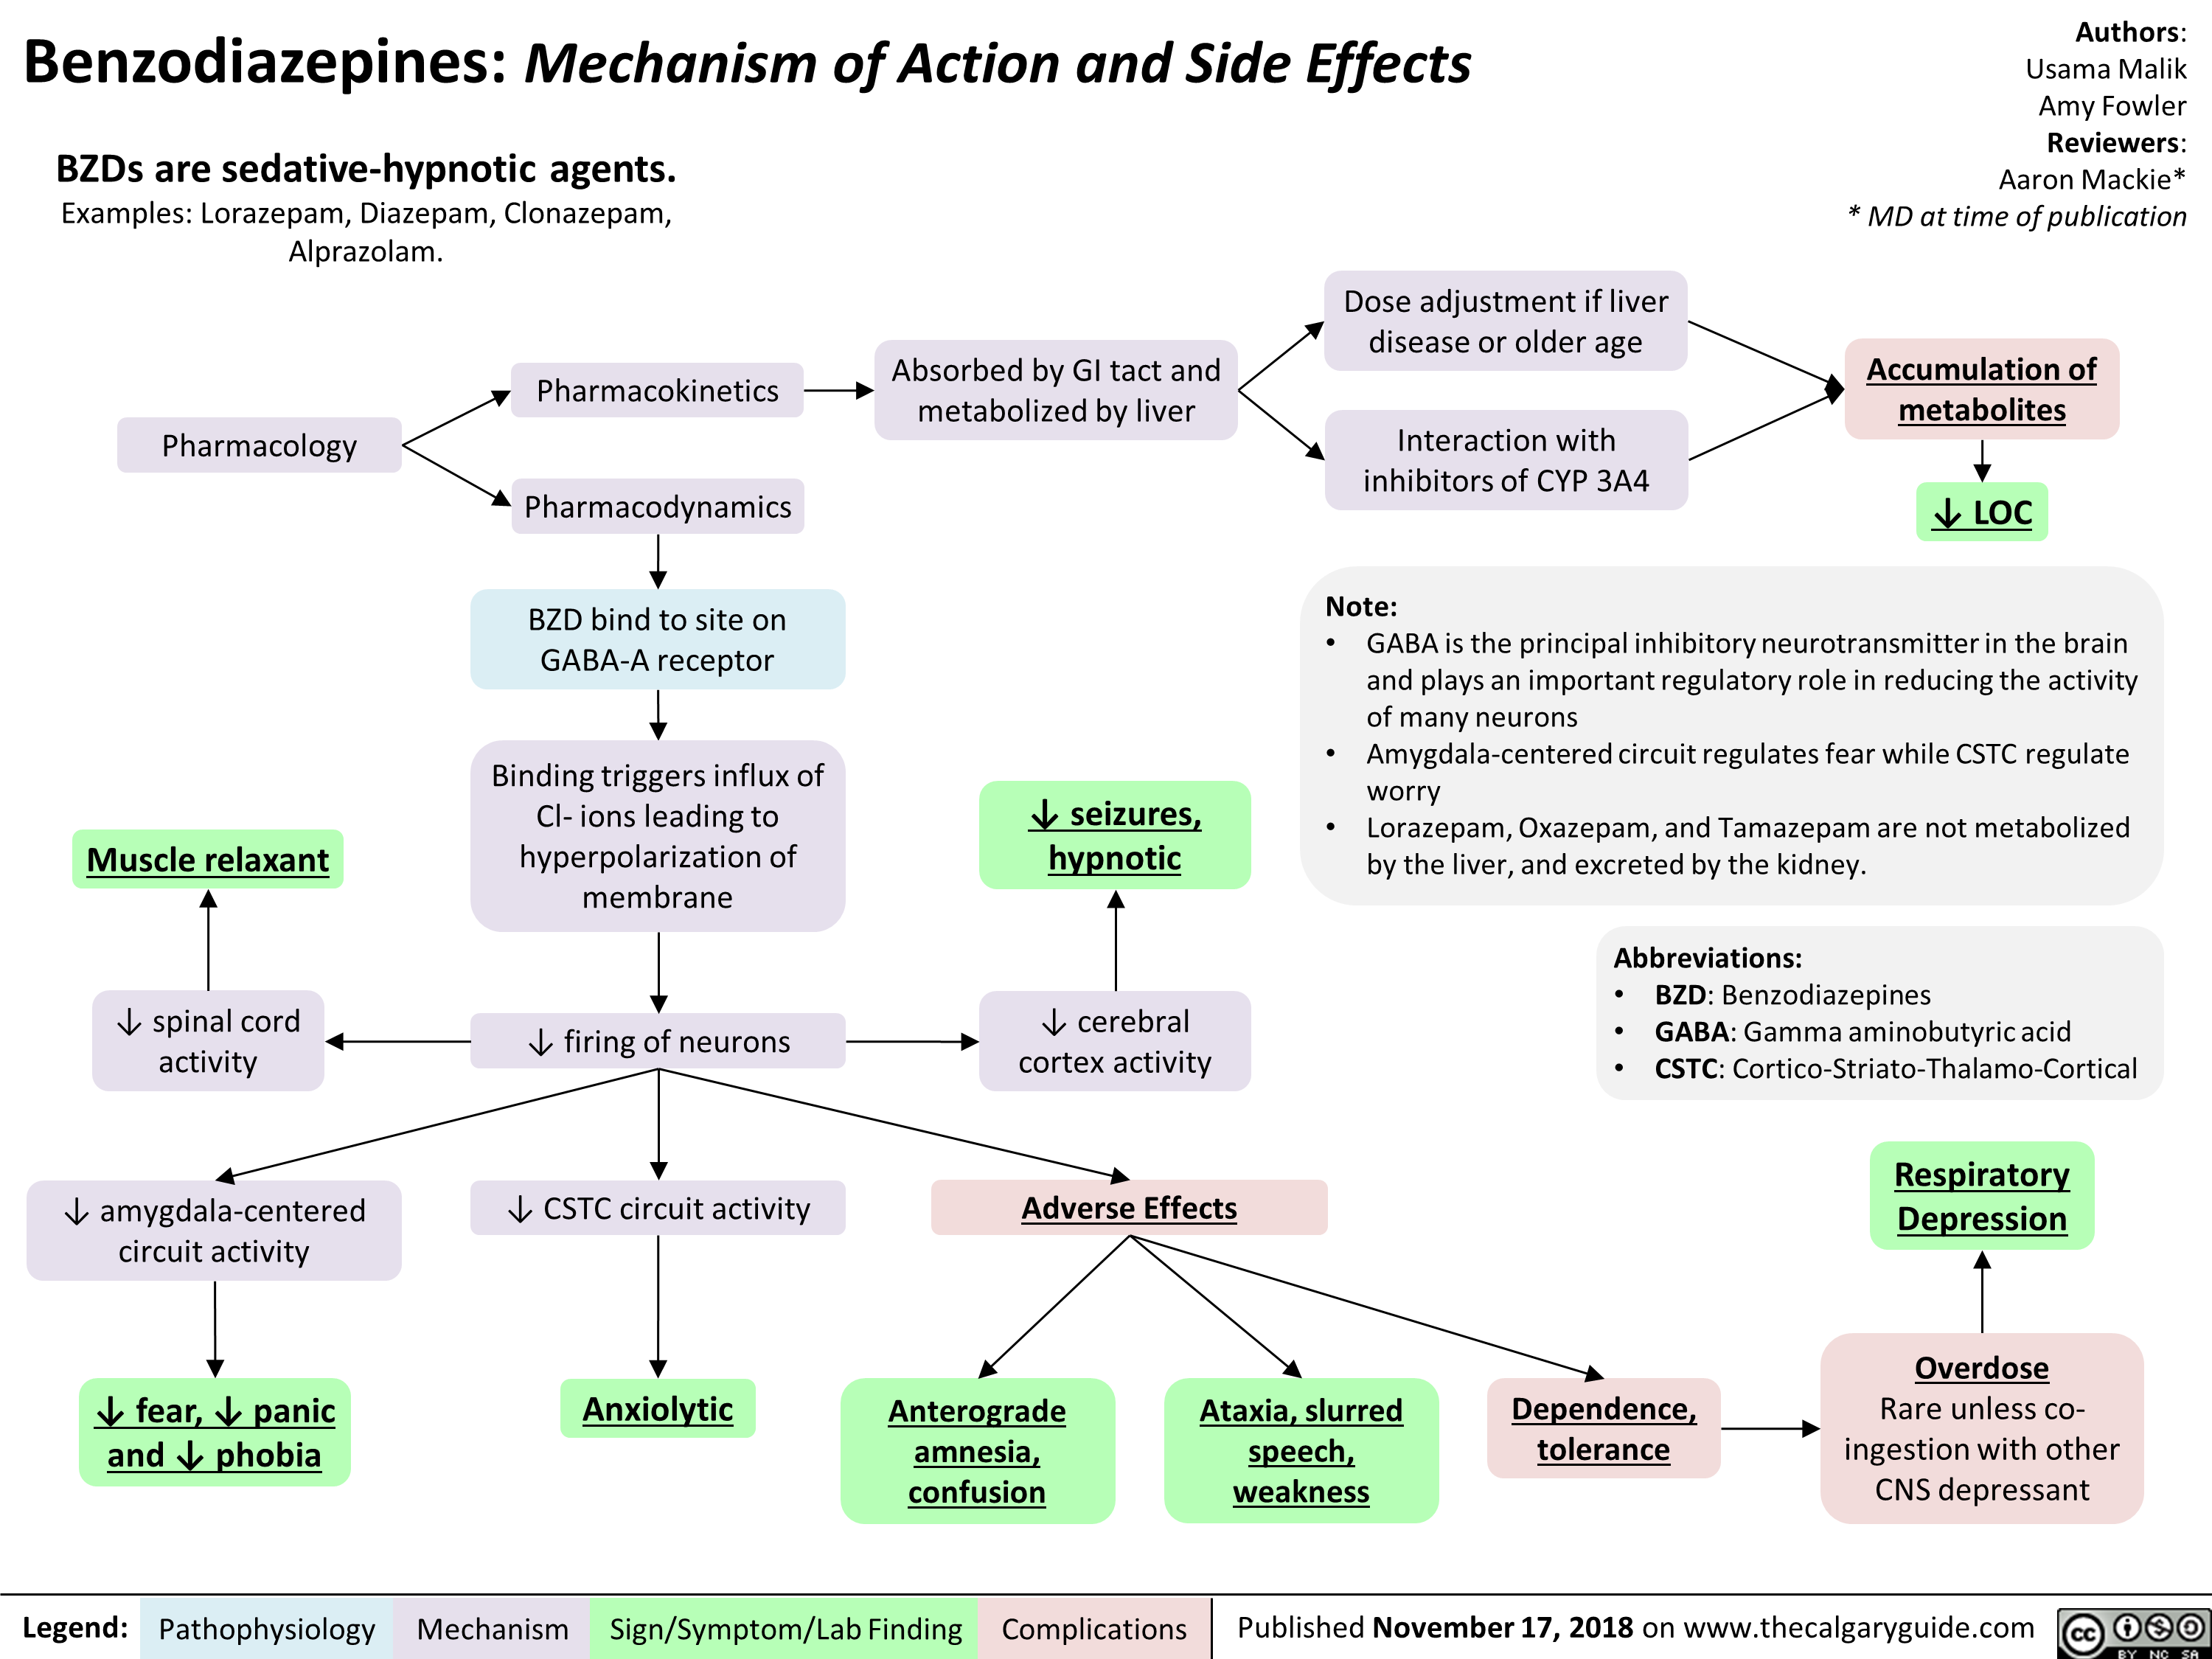 Benzodiazepines: Mechanism of Action and Side Effects 
BZDs are sedative-hypnotic agents. Examples: Lorazepam, Diazepam, Clonazepam, Alprazolam. 
Pharmacology 
Pharmacokinetics Absorbed by GI tact and metabolized by liver 
Pharmacodynamics 1 BZD bind to site on GABA-A receptor 
Dose adjustment if liver disease or older age 
Interaction with inhibitors of CYP 3A4 
Authors: Usama Malik Amy Fowler Reviewers: Aaron Mackie* * MD at time of publication 
Accumulation of metabolites  vir 4, LOC 
Note: • GABA is the principal inhibitory neurotransmitter in the brain and plays an important regulatory role in reducing the activity of many neurons Amygdala-centered circuit regulates fear while CSTC regulate worry Lorazepam, Oxazepam, and Tamazepam are not metabolized by the liver, and excreted by the kidney. 
Muscle relaxant 1 Binding triggers influx of Cl- ions leading to hyperpolarization of membrane • • 4, seizures, hypnotic  
spinal activity cord  firing of neurons 4, cerebral Abbreviations: • BZD: Benzodiazepines • GABA: Gamma aminobutyric acid • CSTC: Cortico-Striato-Thalamo-Cortical NI, cortex activity • Respiratory amygdala-centered CSTC circuit activity Adverse Effects Depression  circuit activity Overdose 4, fear, 4, panic Anxiolytic Anterograde Ataxia, slurred Dependence, Rare unless co-and 4, phobia amnesia, speech, tolerance ingestion with other CNS depressant confusion weakness 